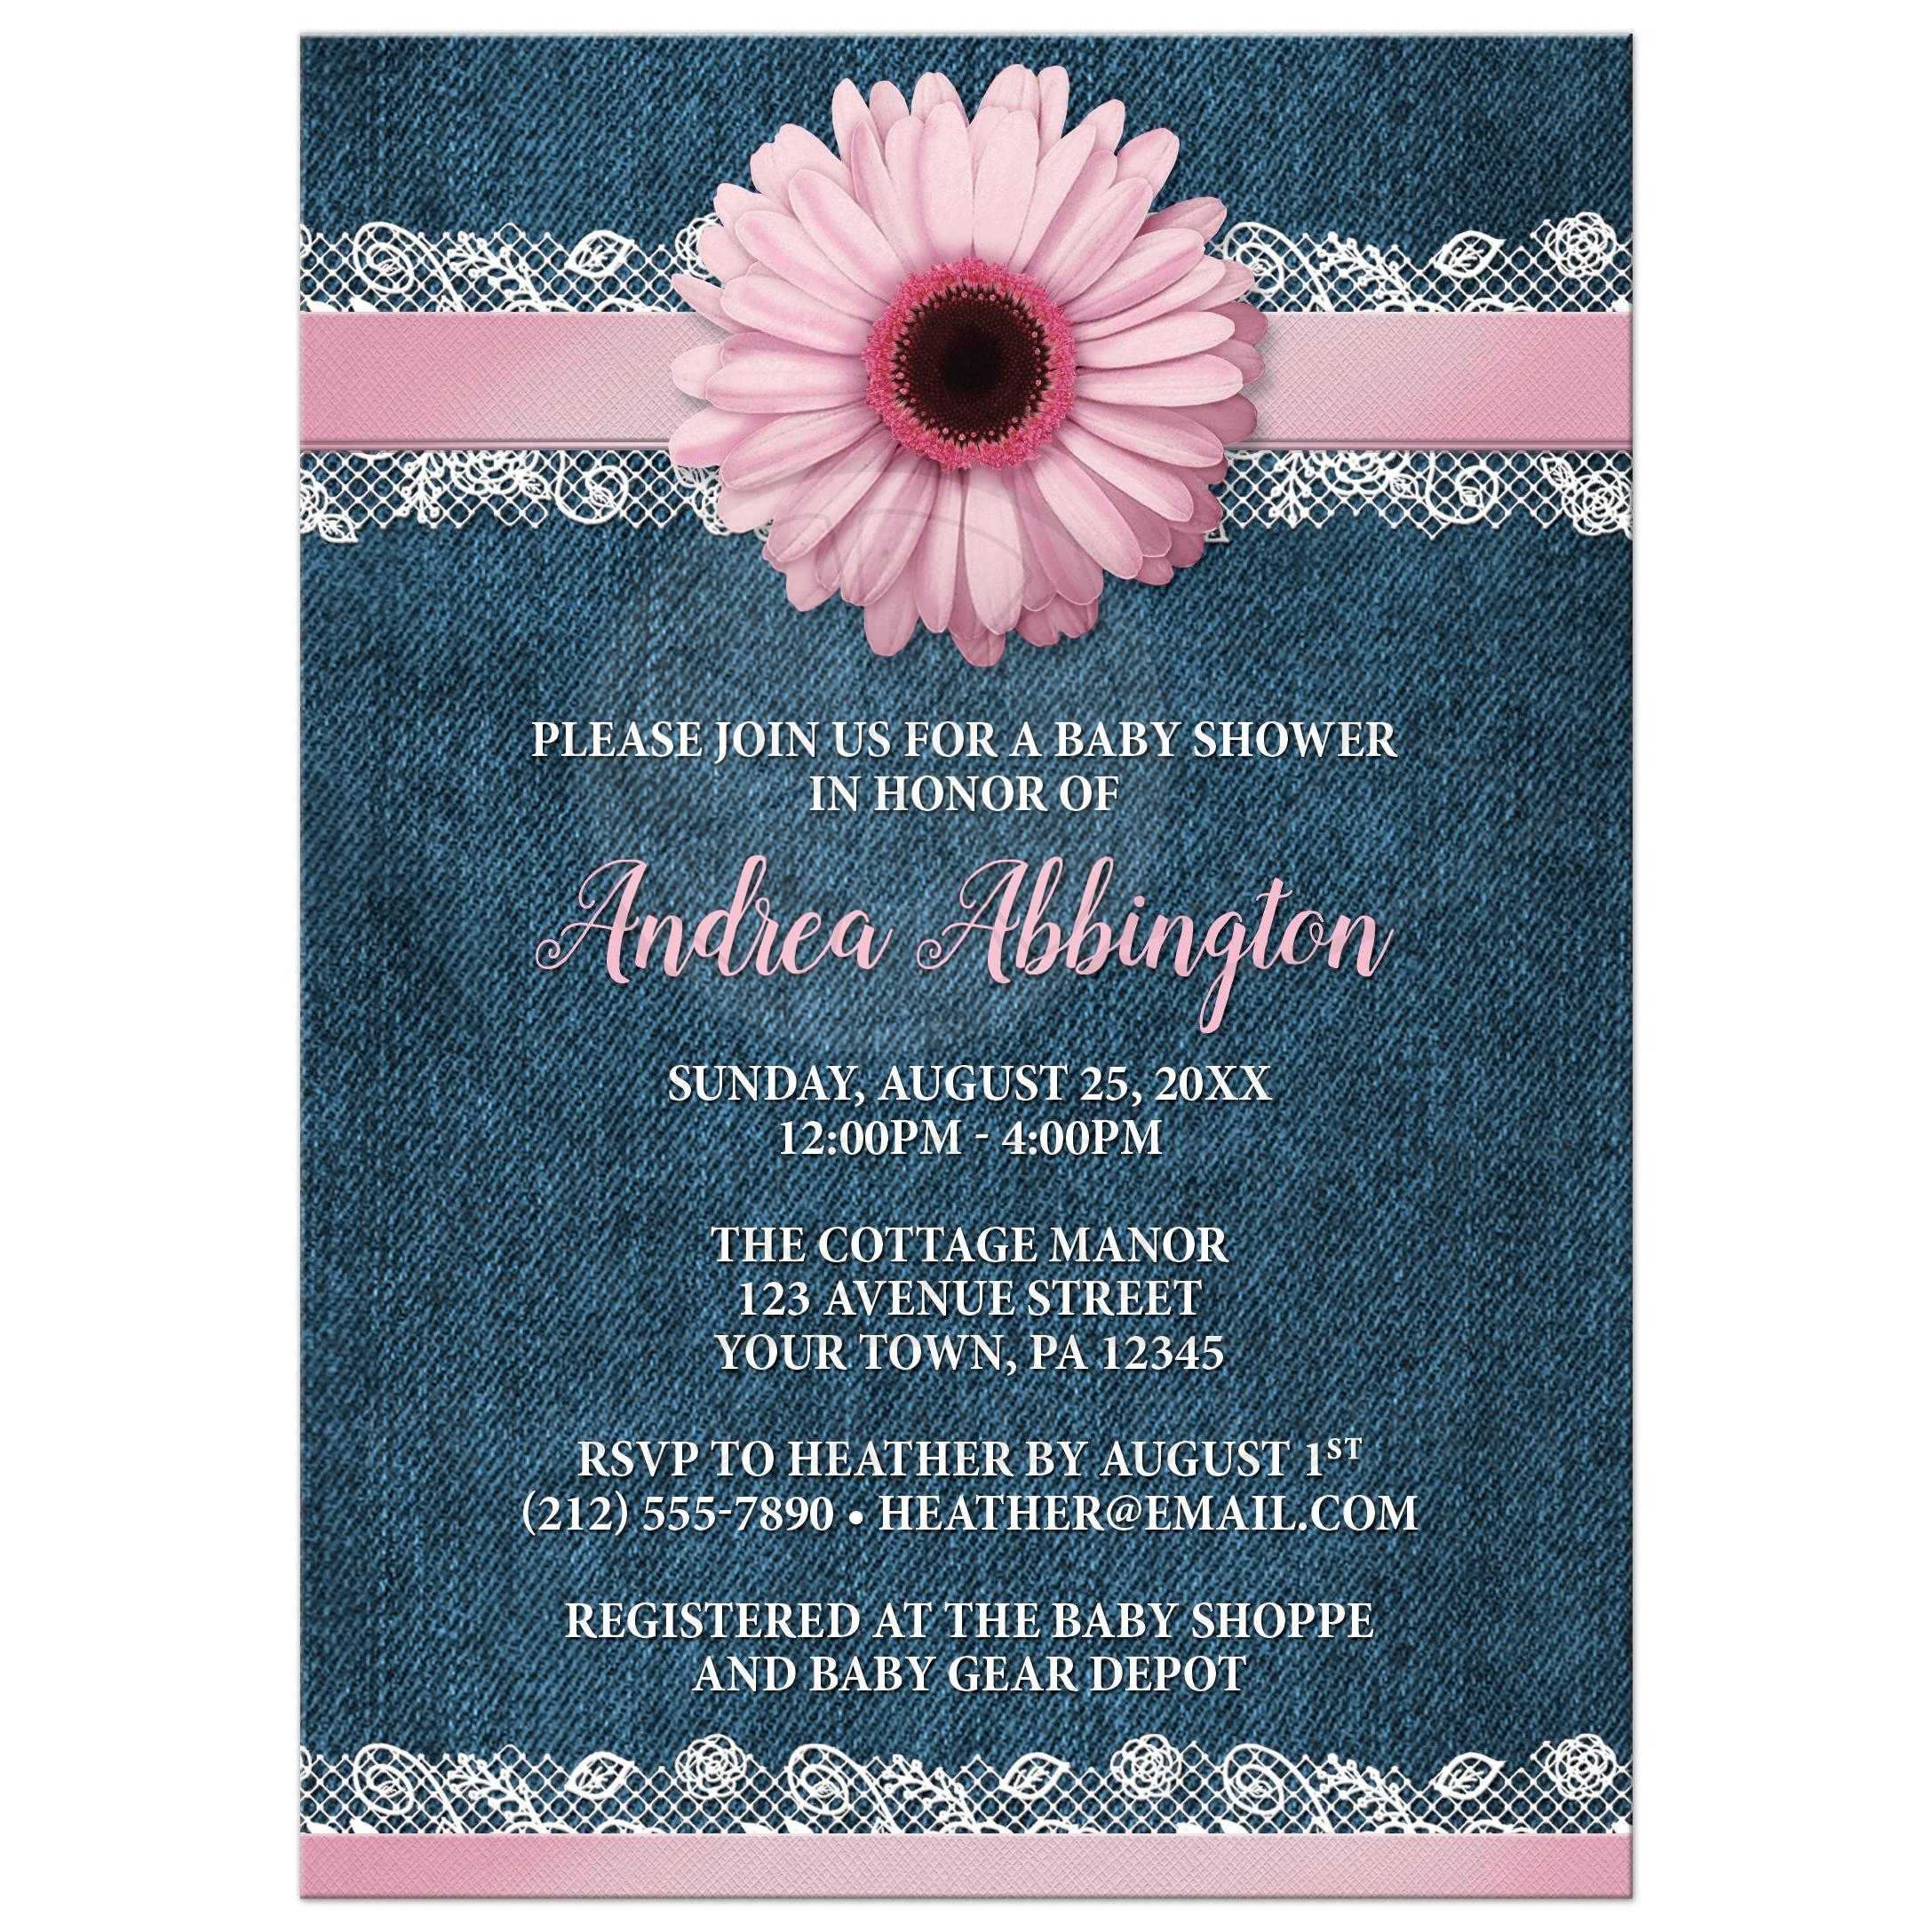 Full Size of Baby Shower:nautical Baby Shower Invitations For Boys Baby Girl Themes For Bedroom Baby Shower Ideas Baby Shower Decorations Themes For Baby Girl Nursery Baby Baby Shower Tableware Creative Baby Shower Ideas Free Printable Baby Shower Games Unique Baby Shower Themes